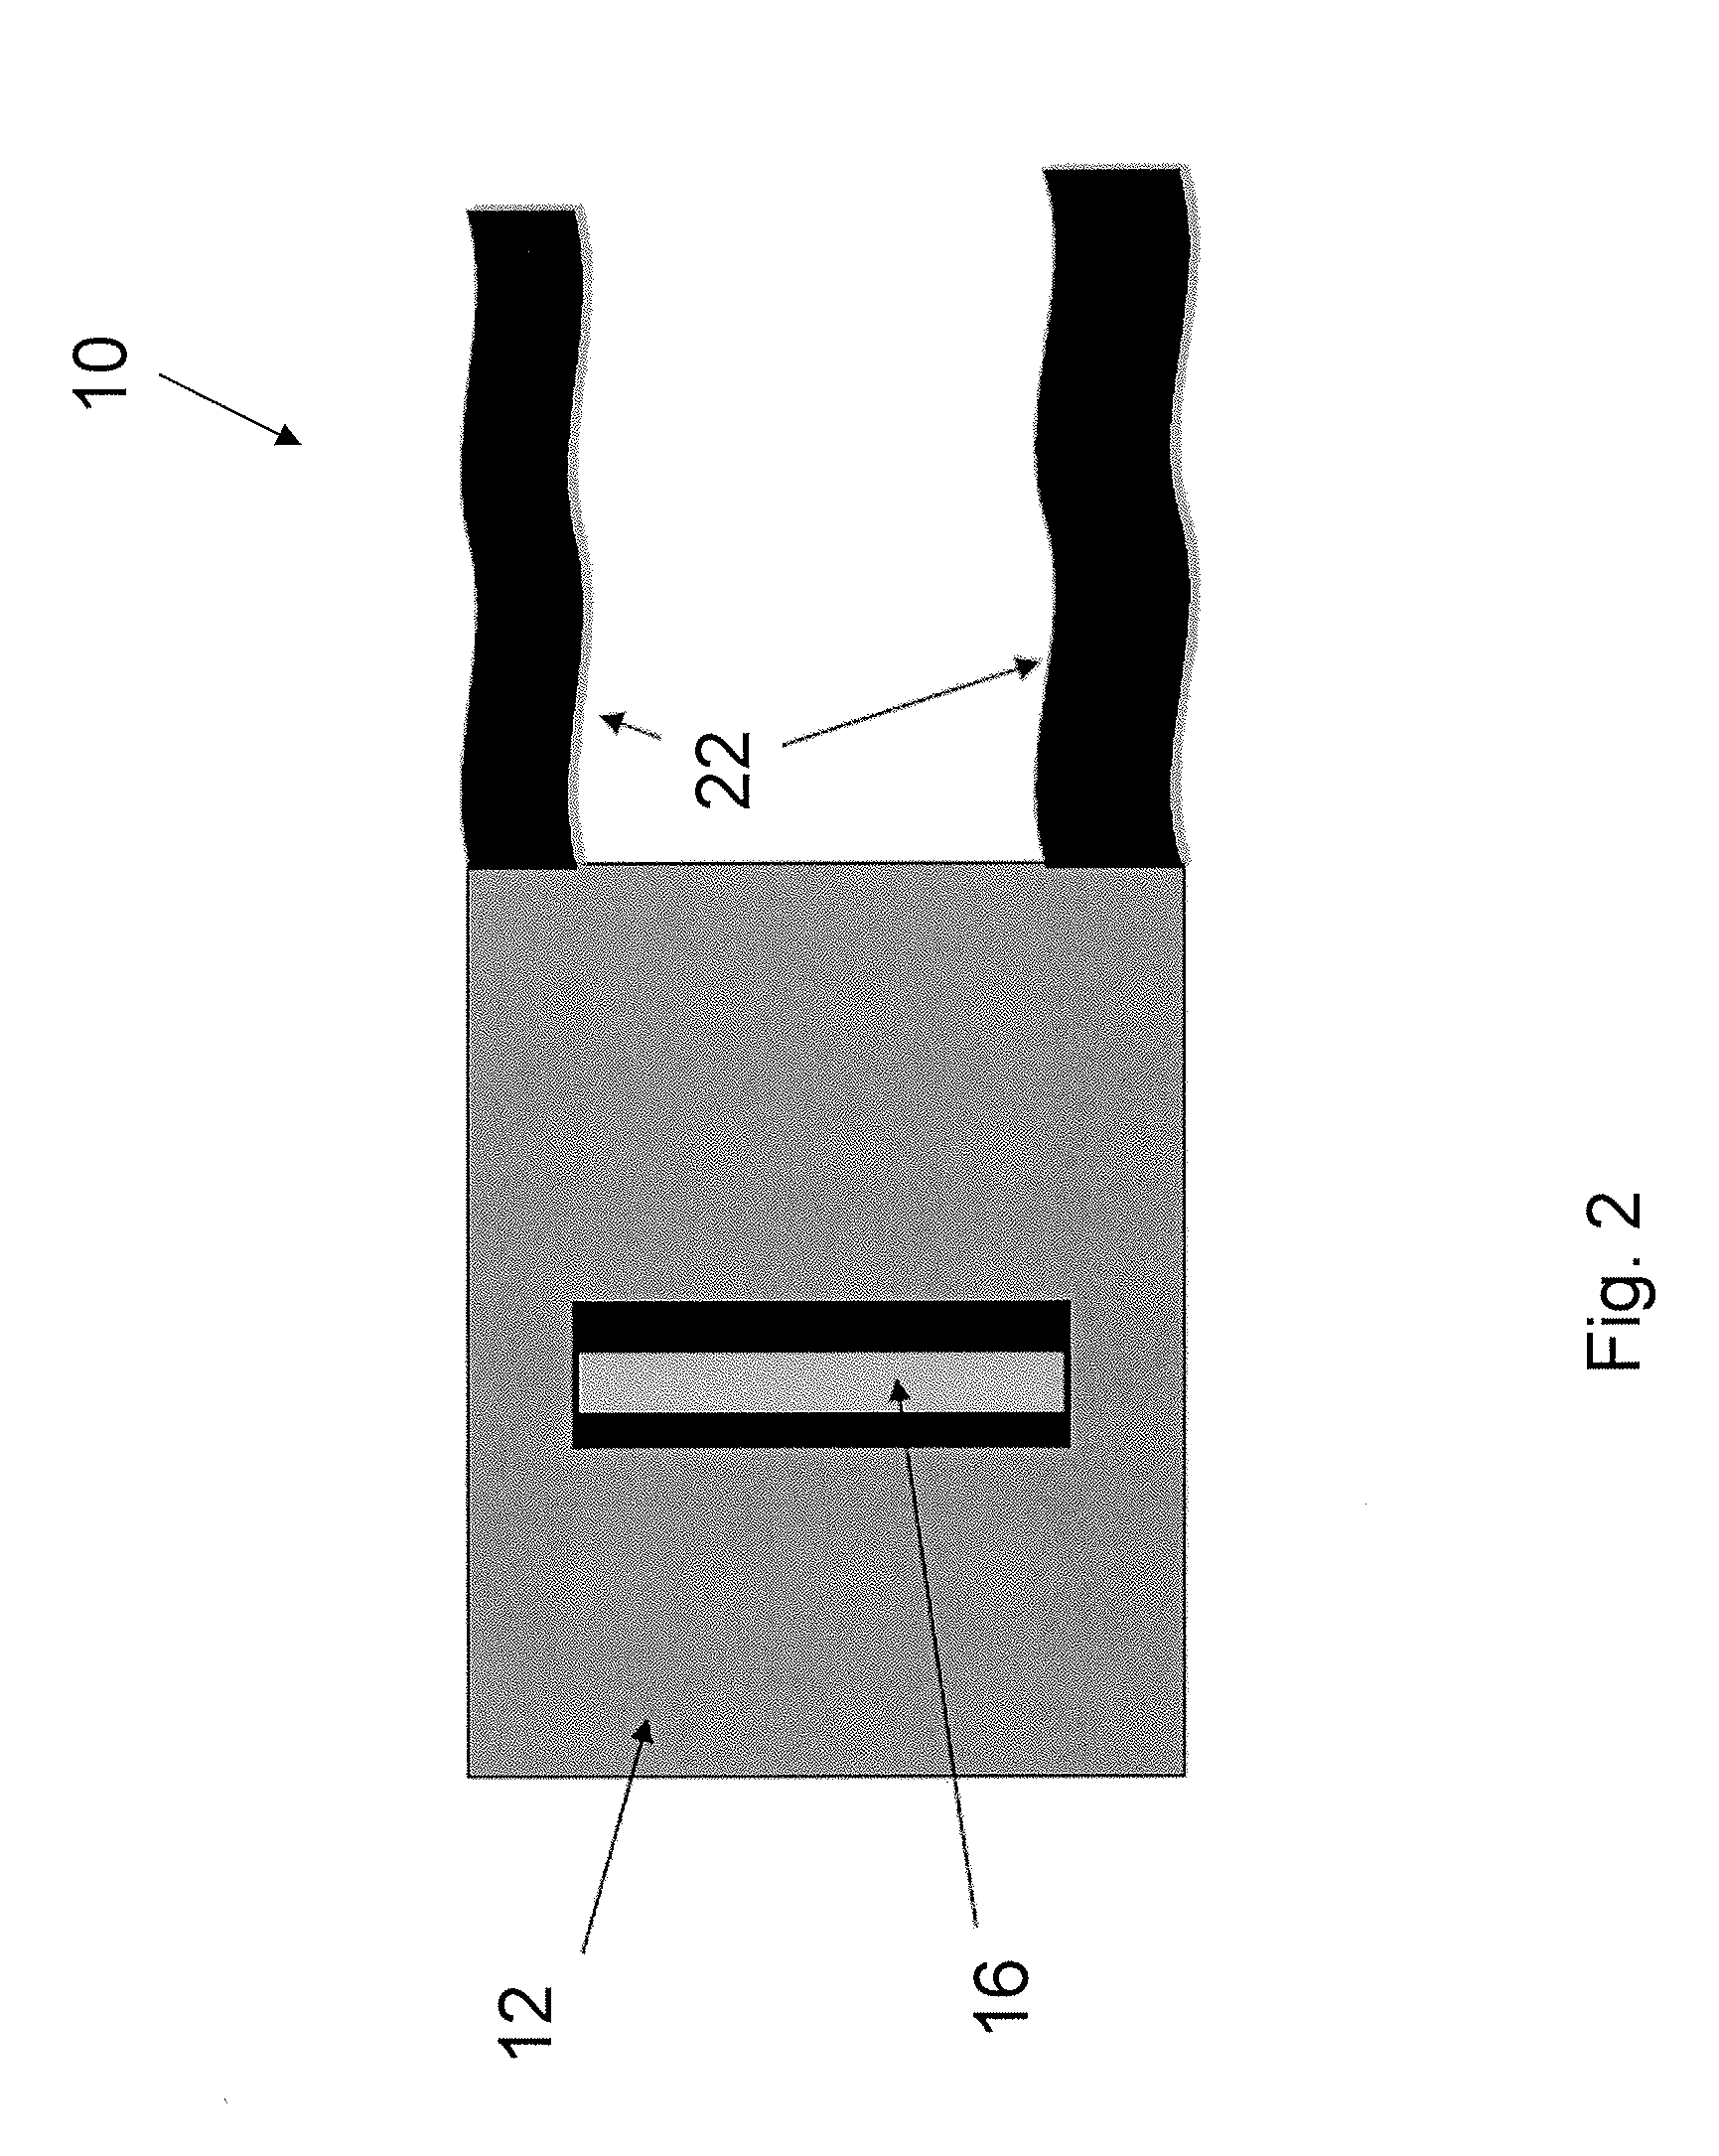 Retractor safety device